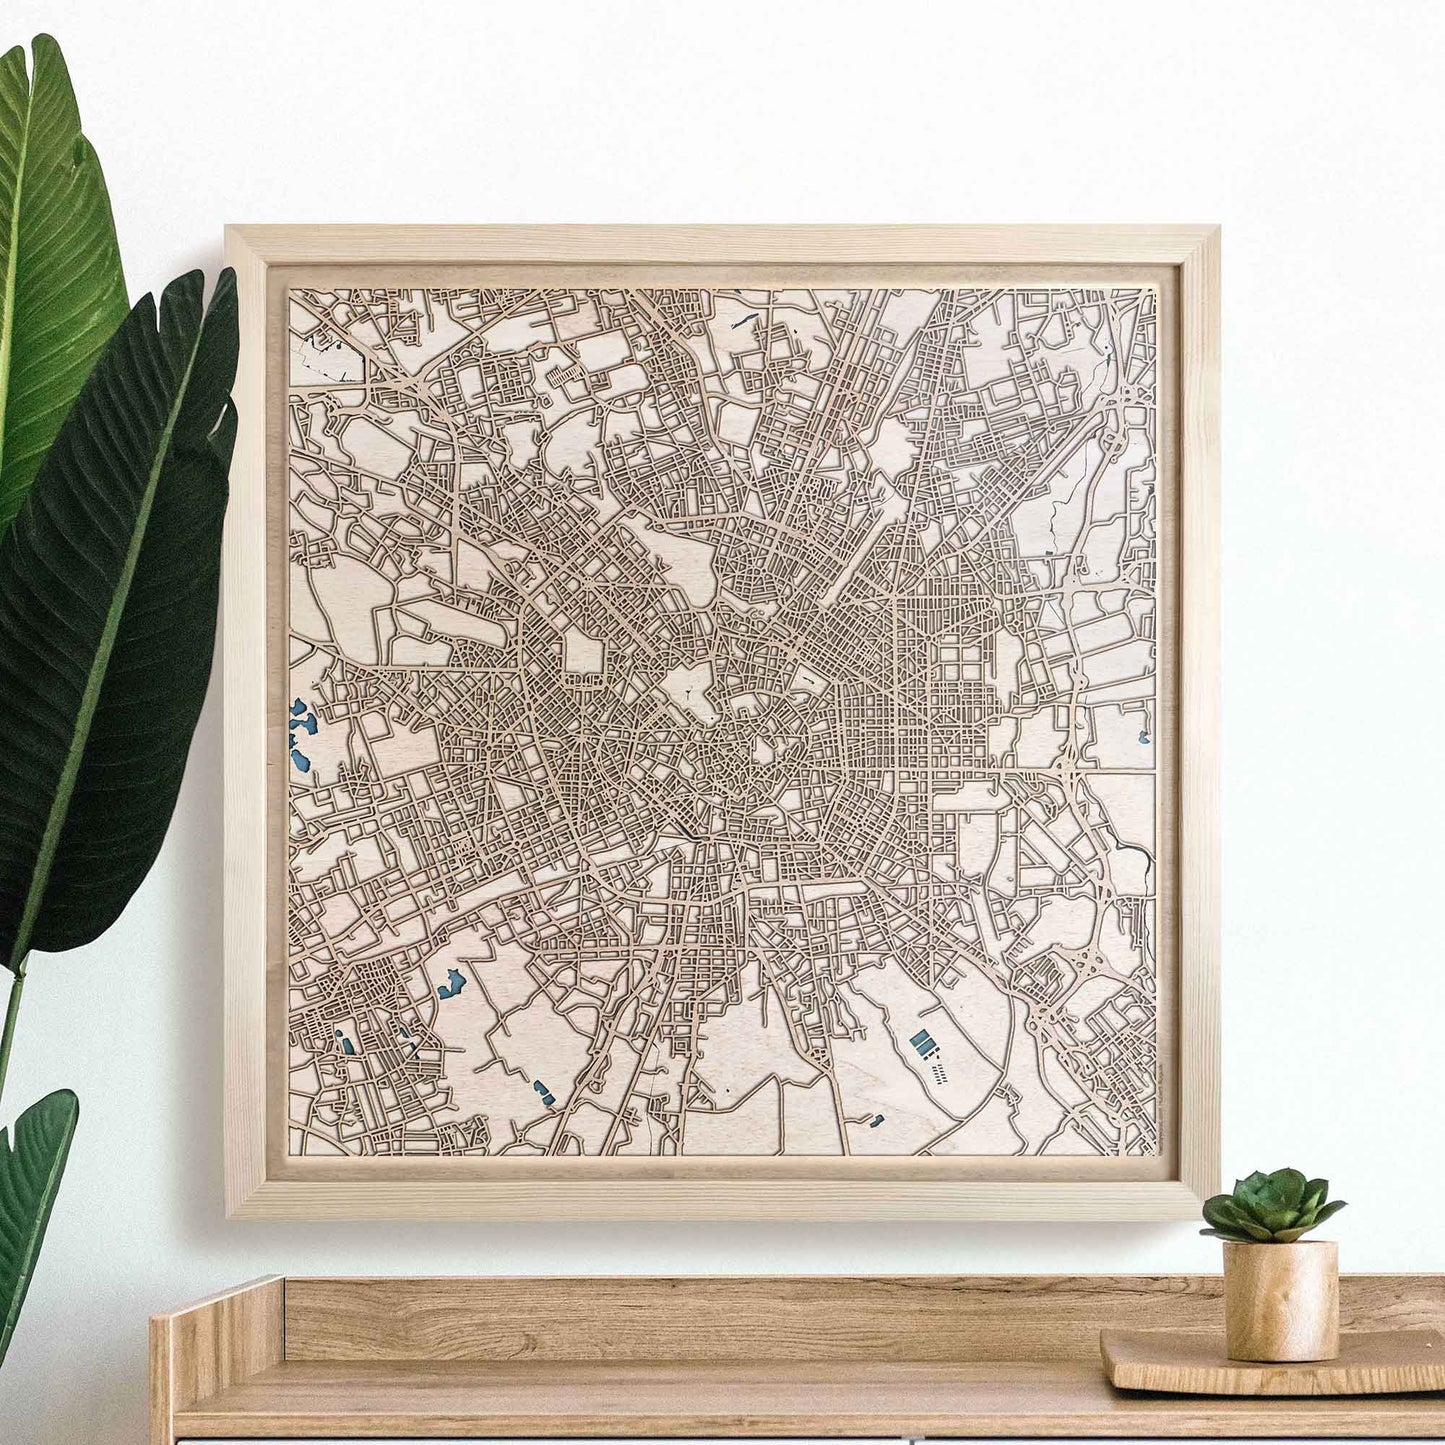 Milan Wooden Map by CityWood - Custom Wood Map Art - Unique Laser Cut Engraved - Anniversary Gift